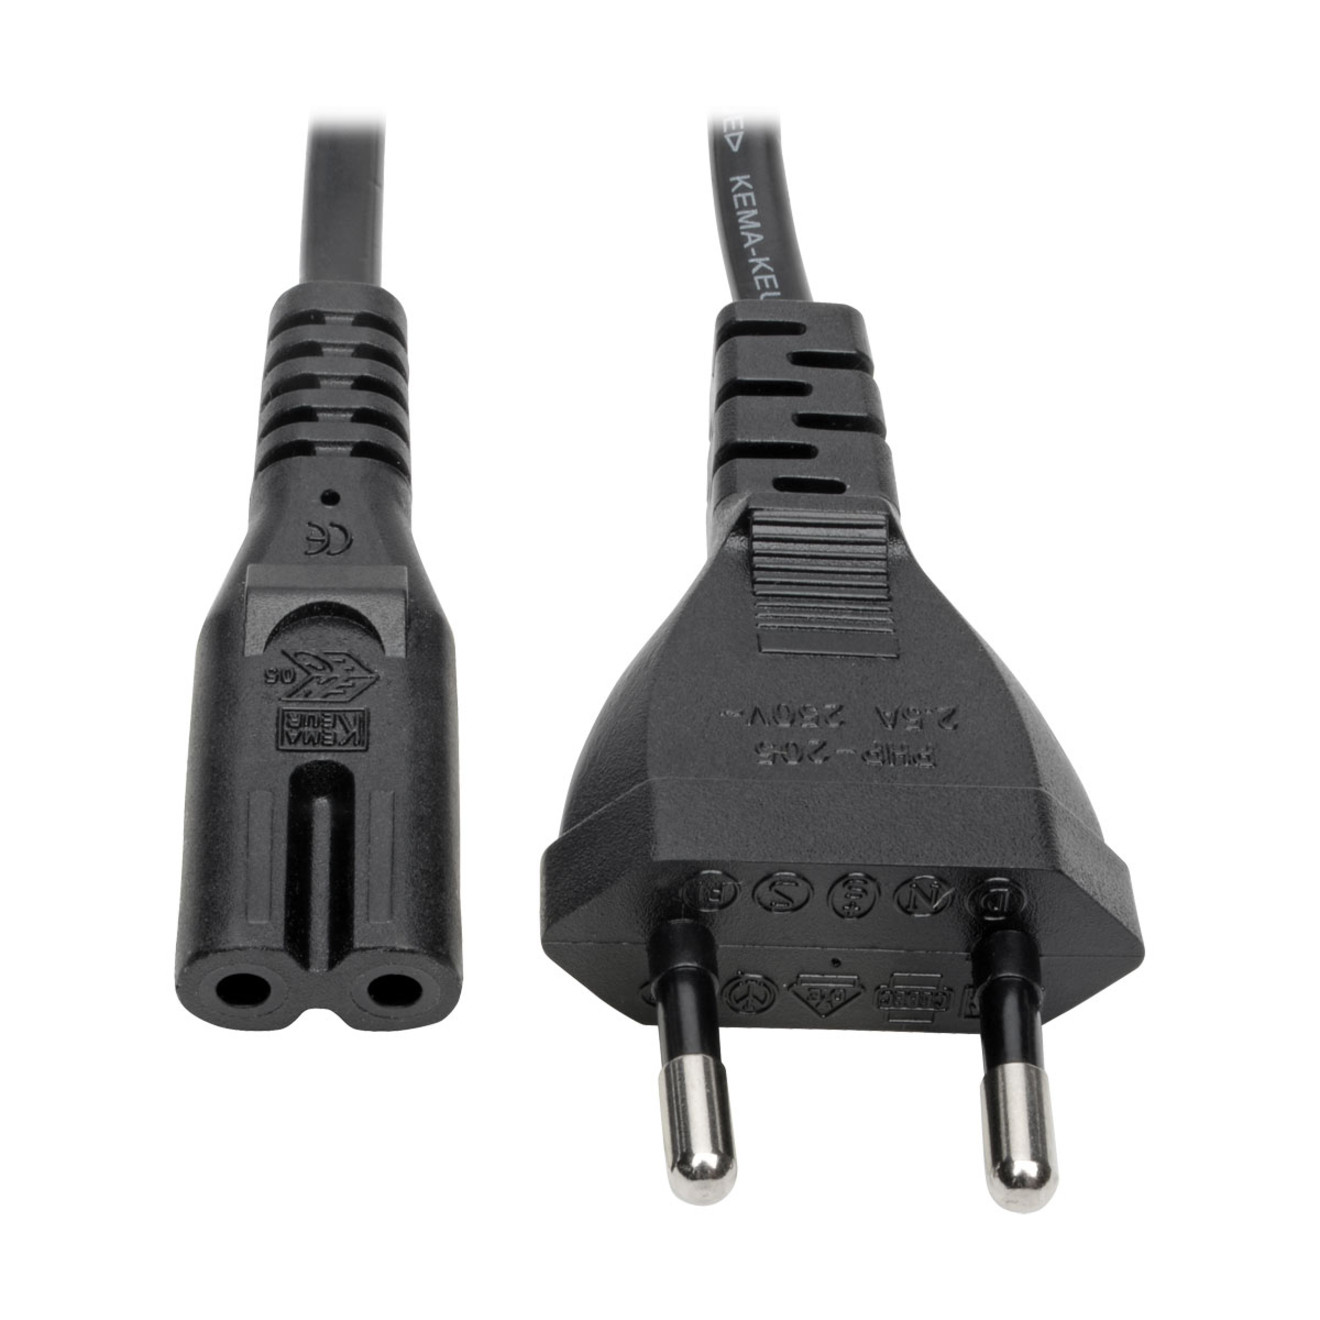 Tripp Lite Standard Power Cord250 V AC / 2.50 ABlack6 ft Cord LengthEurope, Middle East, Russia, South America, Africa, Asia P059-006